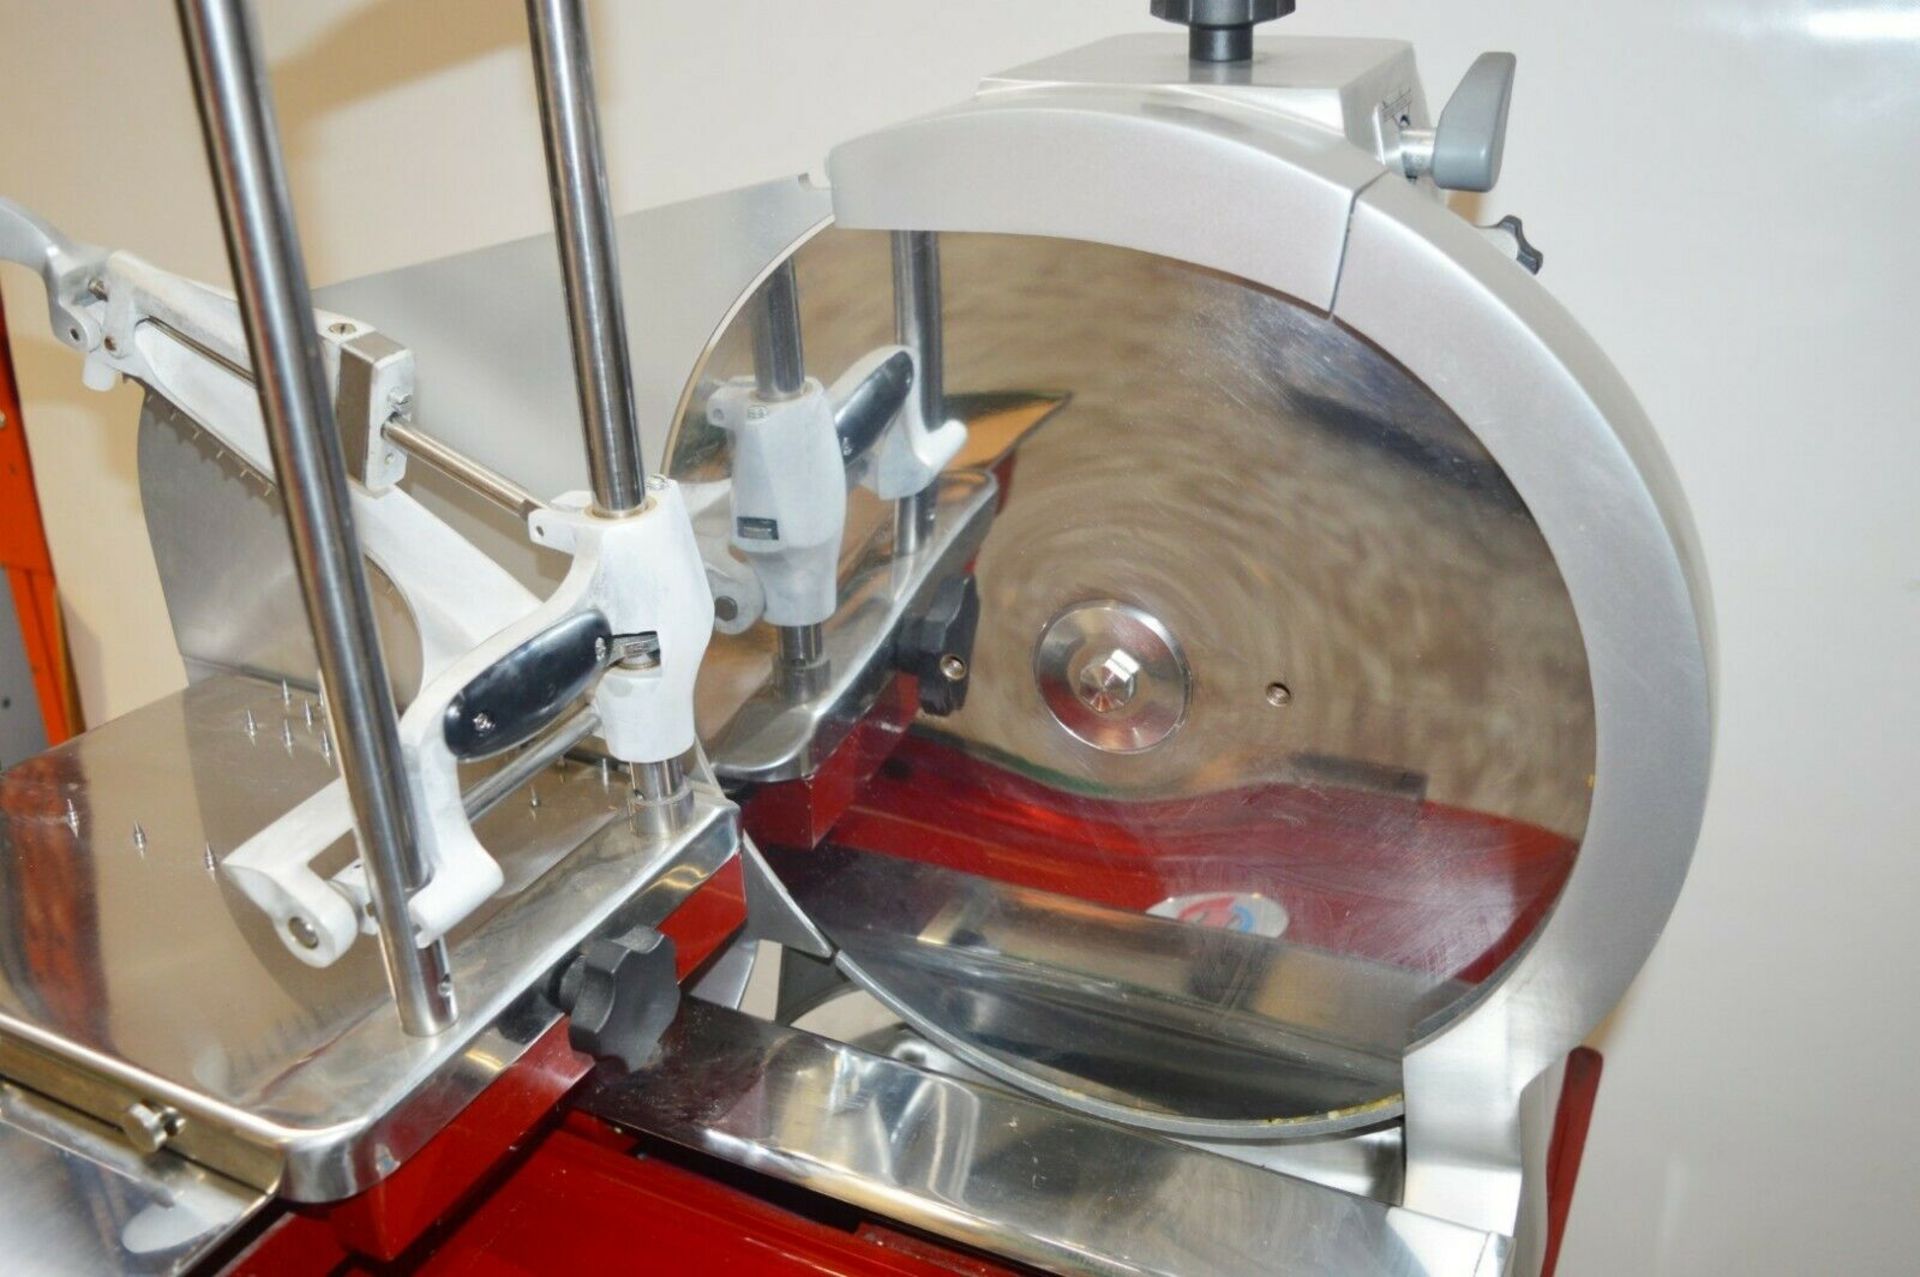 1 x Noaw 370mm Flywheel Meat / Prosciutto Slicer - Model 370/81CE220 - Ex M&S Made in Italy - - Image 5 of 9